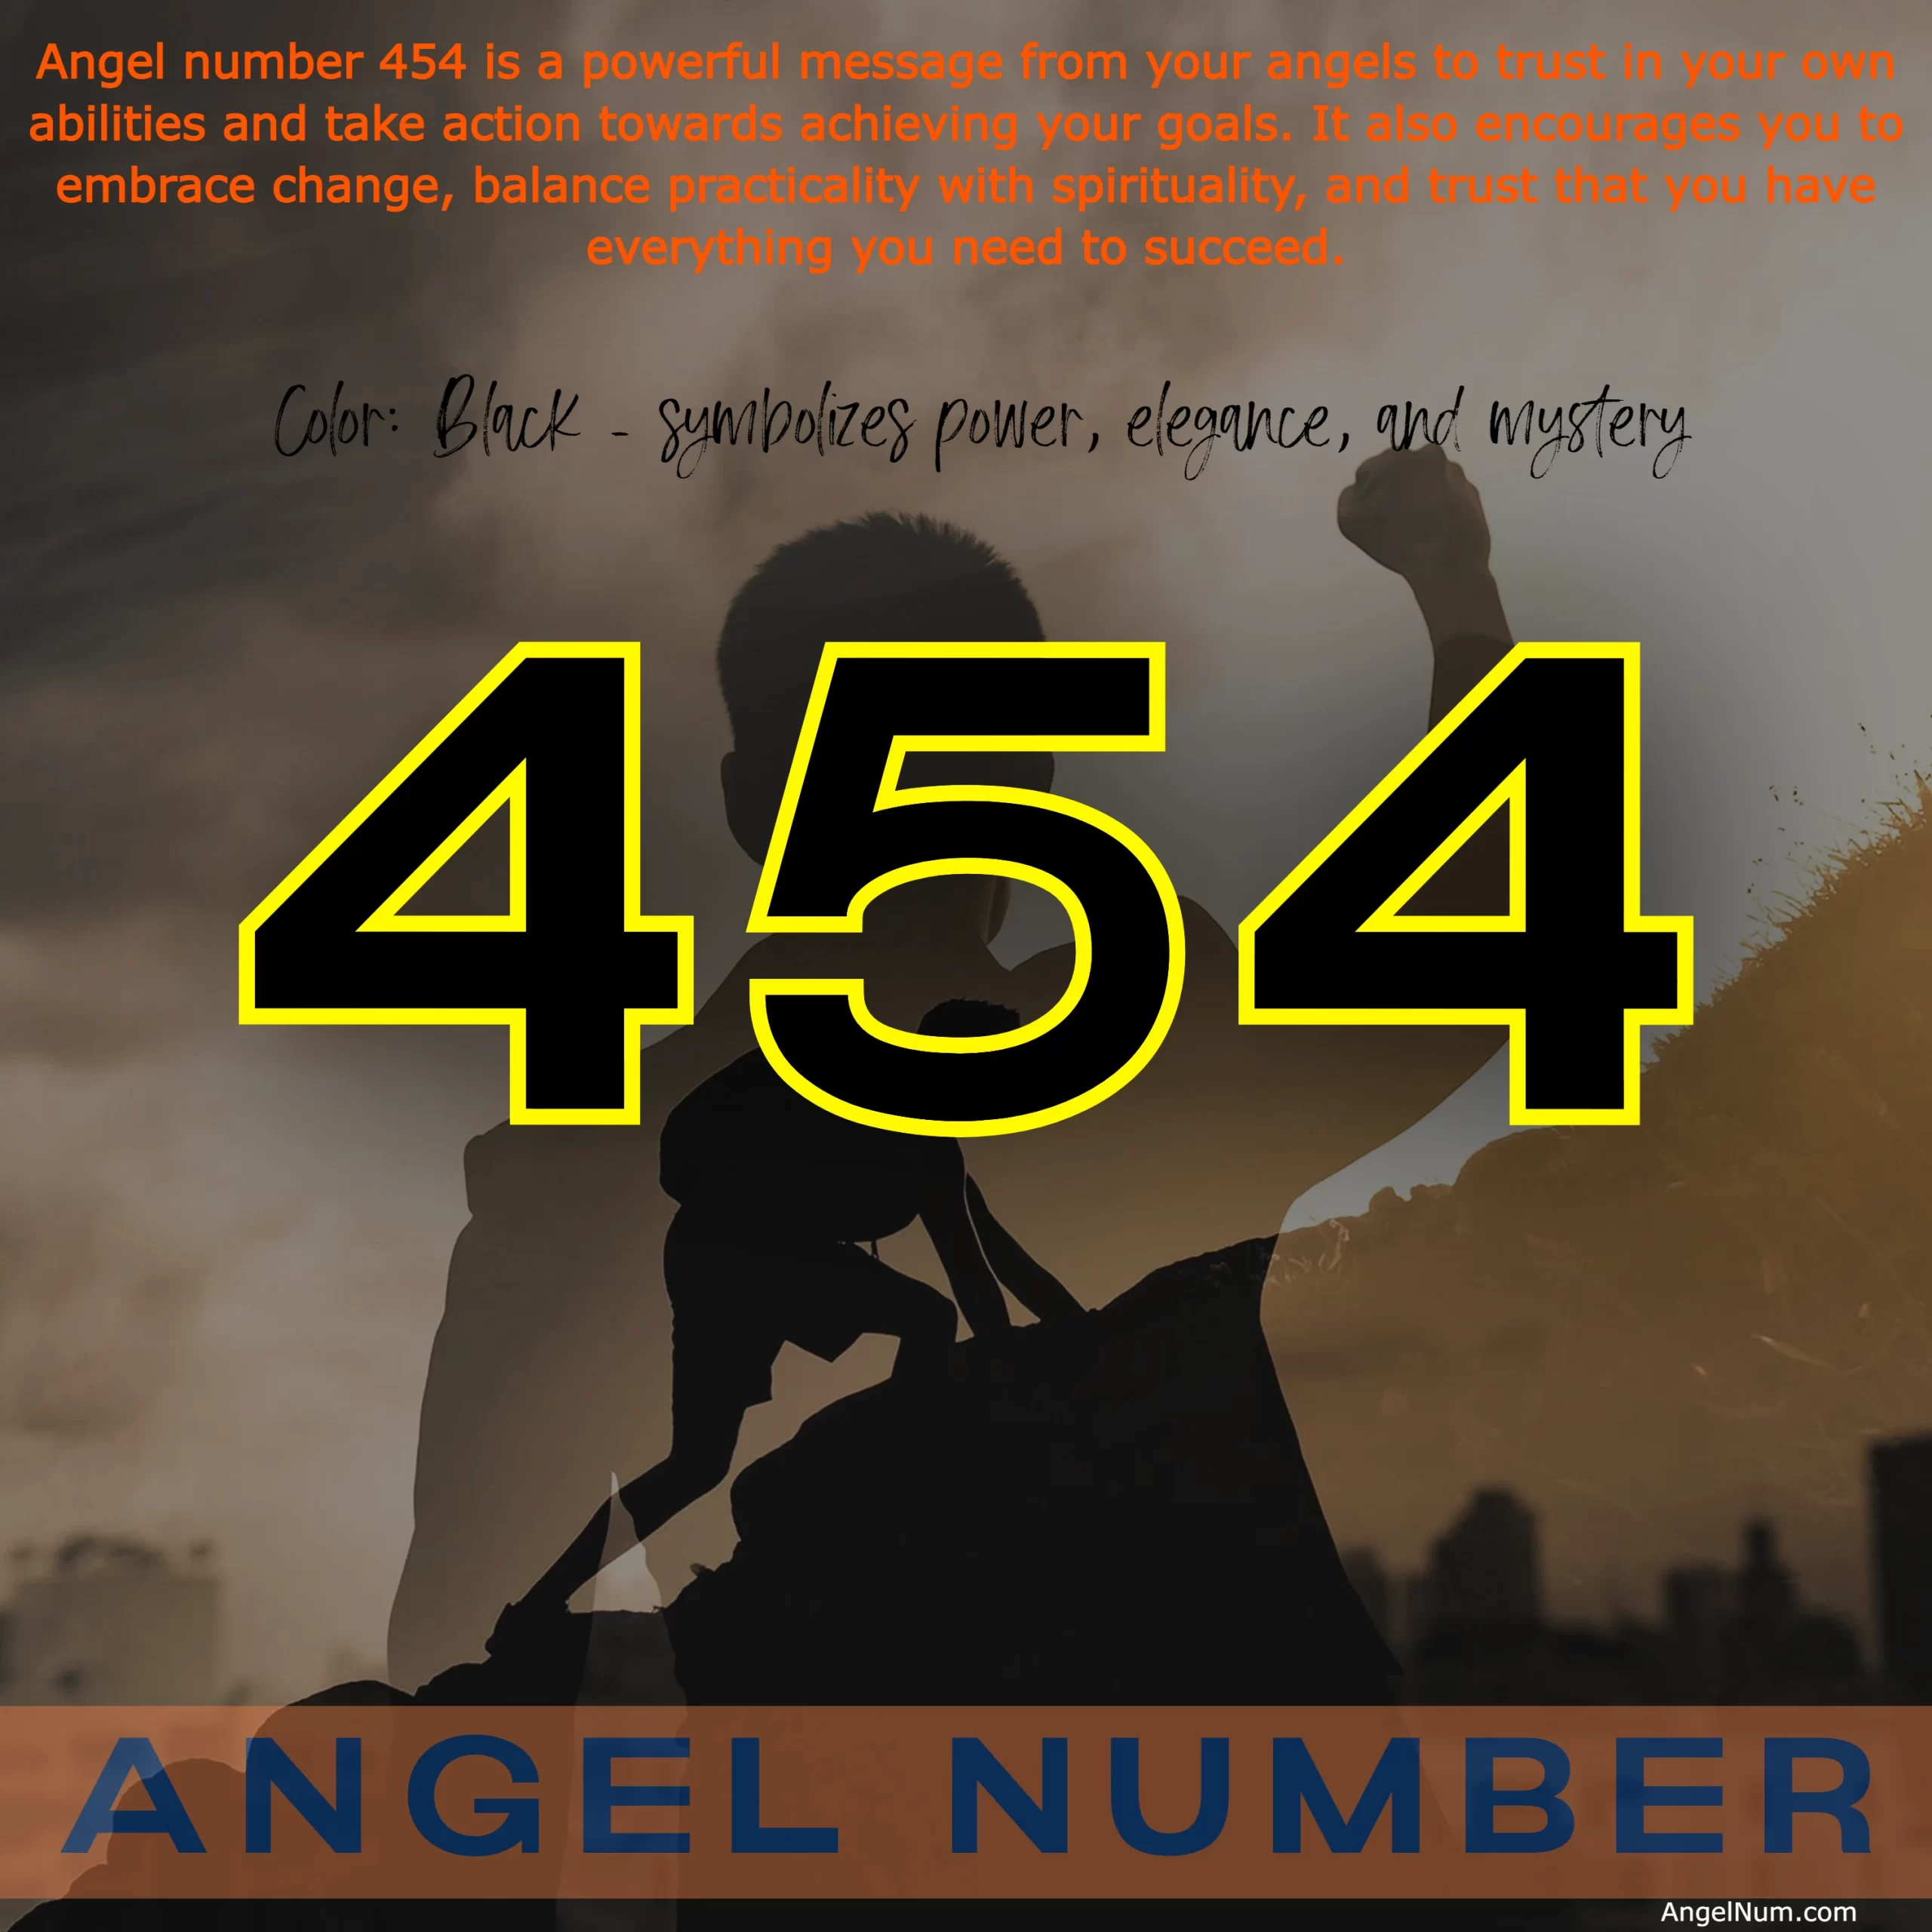 Angel Number 454: Trust in Your Abilities and Take Action